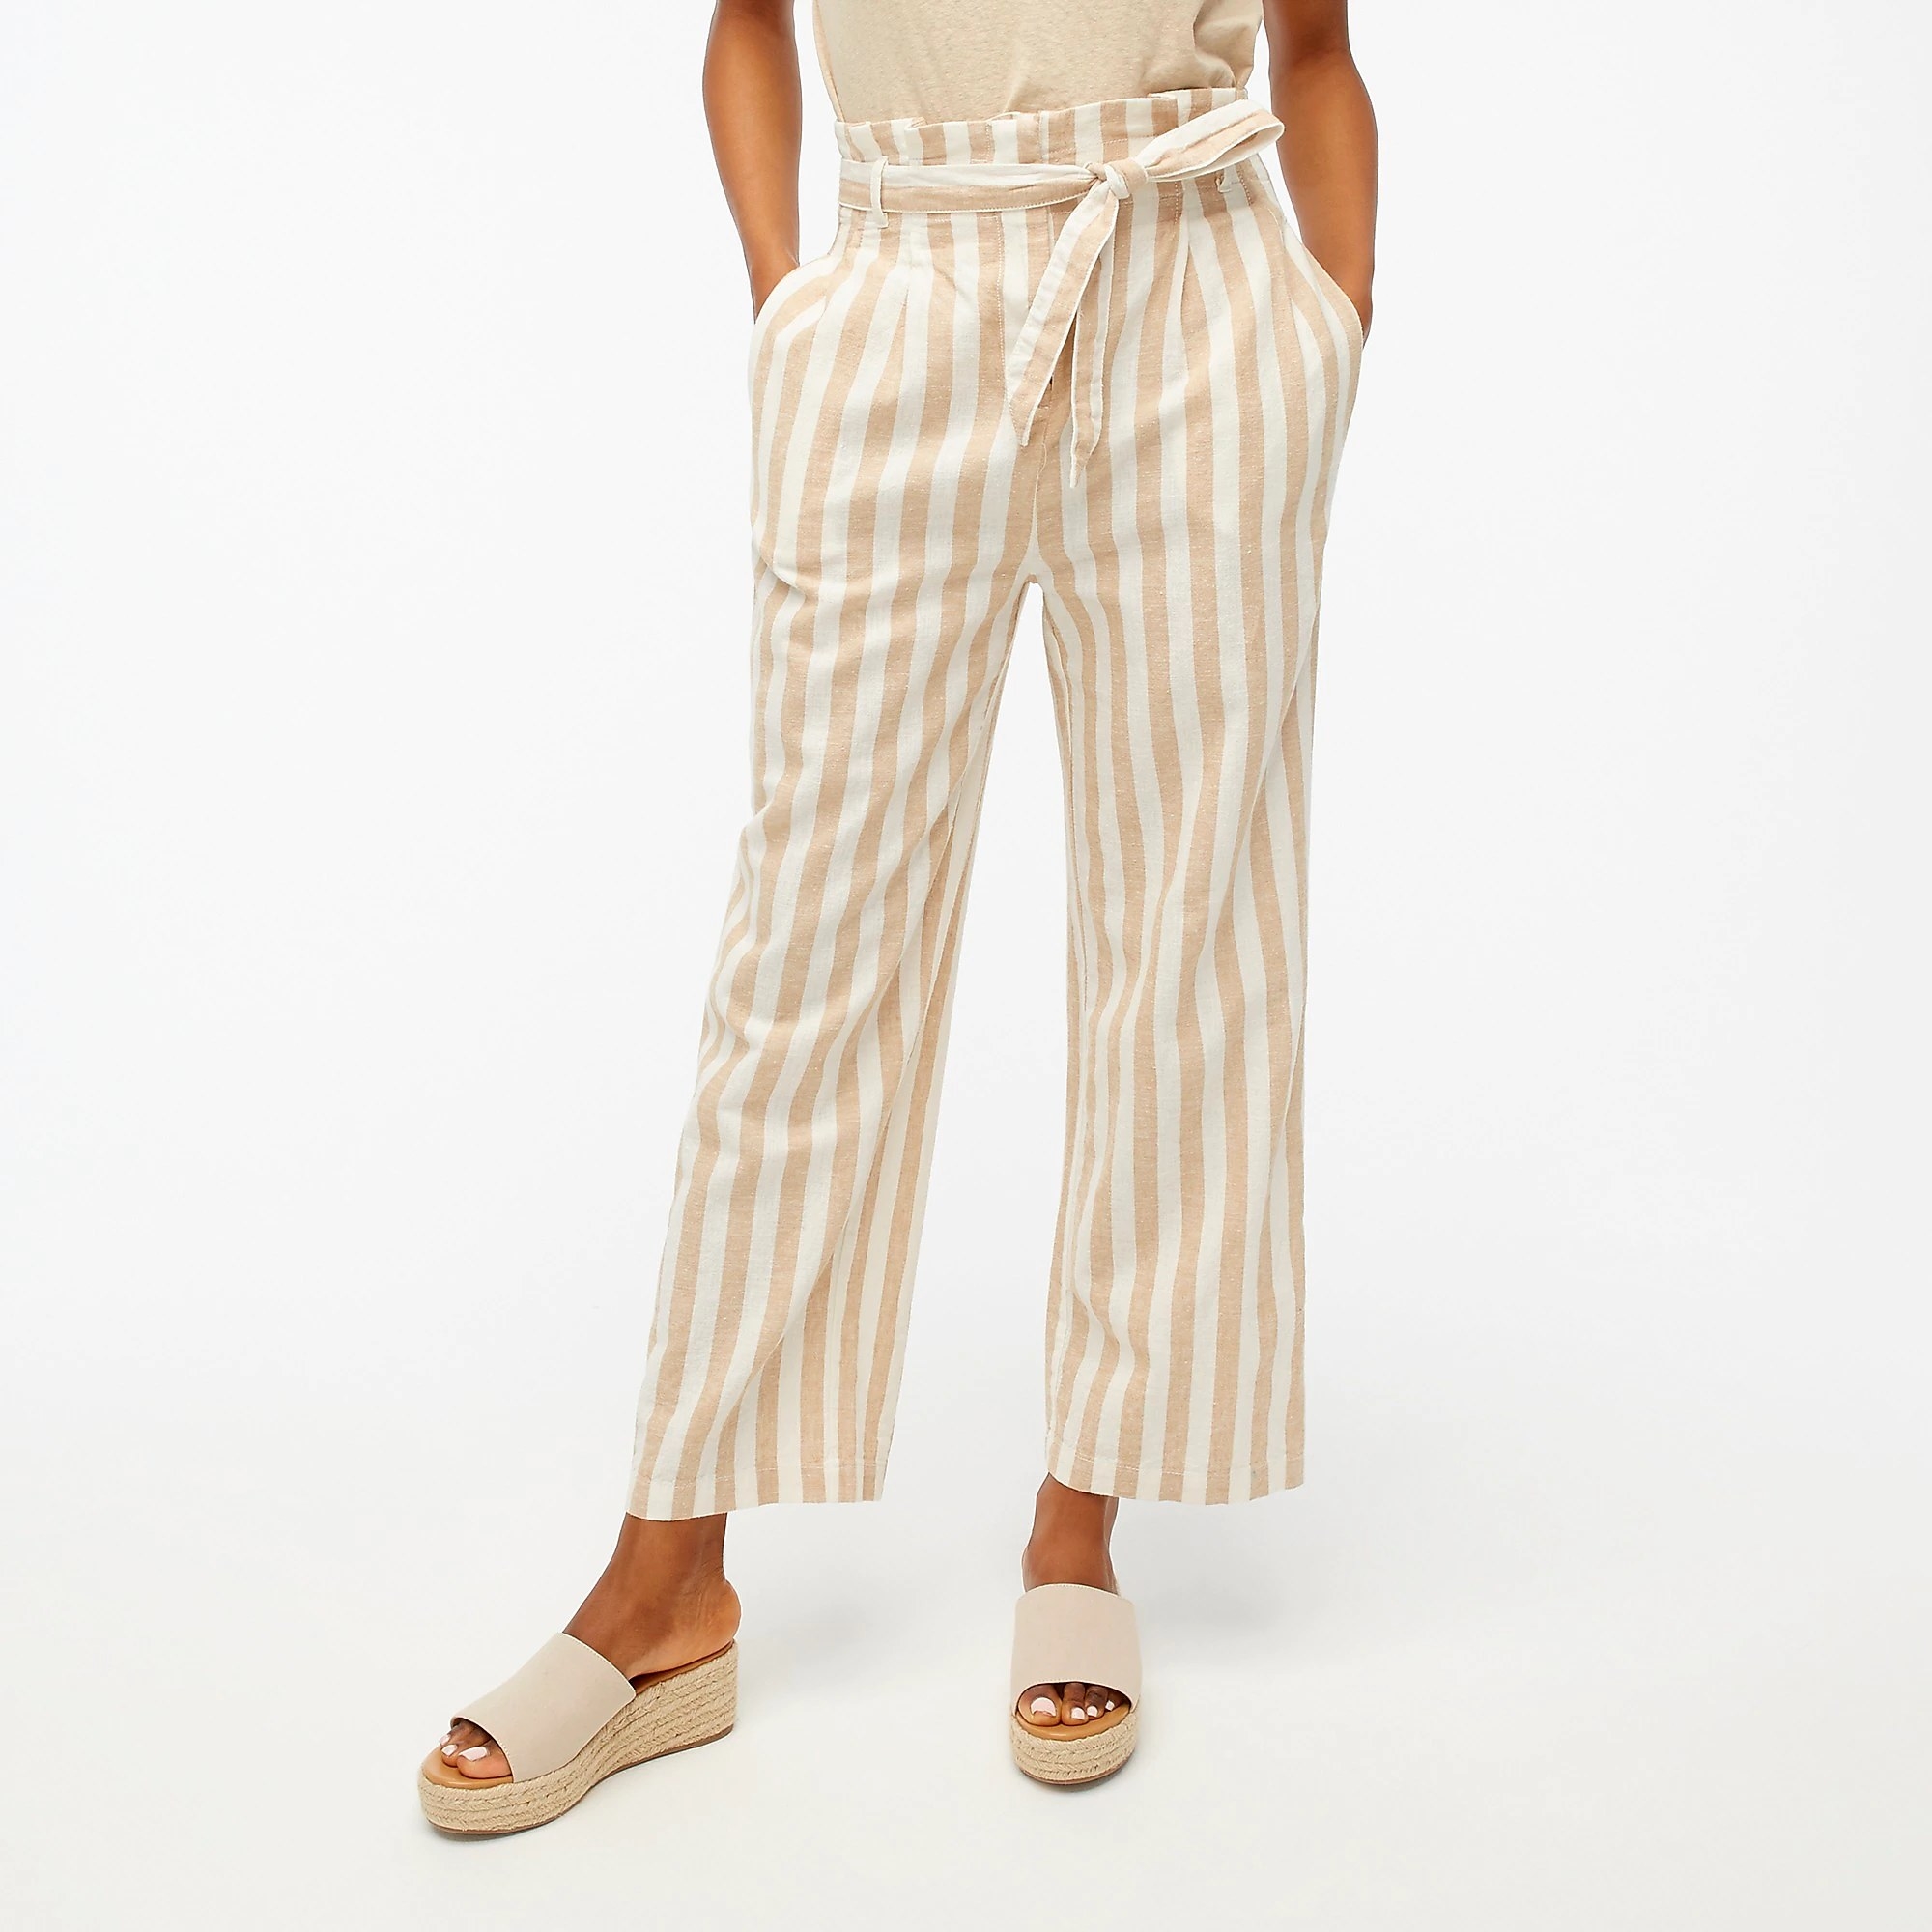 A model wearing the khaki and ivory striped pants